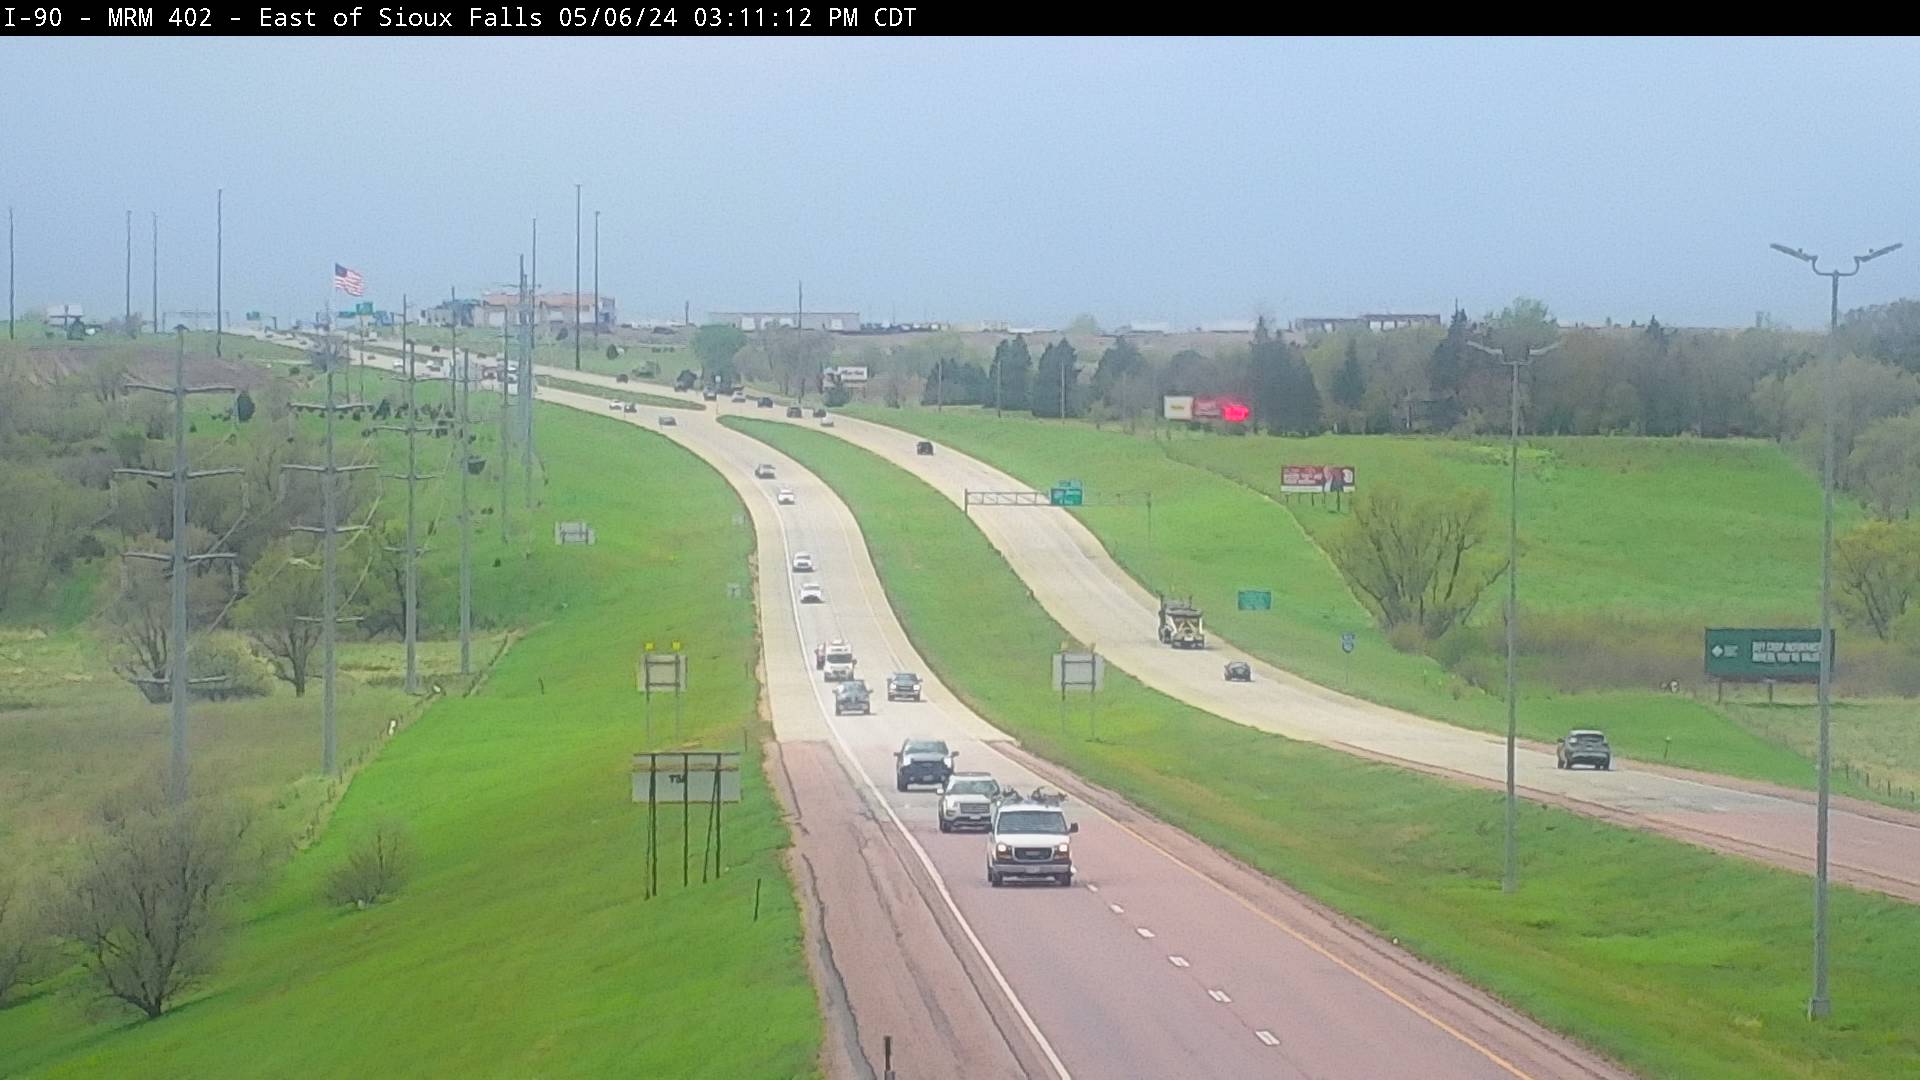 East of town along I-90 @ MP 402 - West Traffic Camera